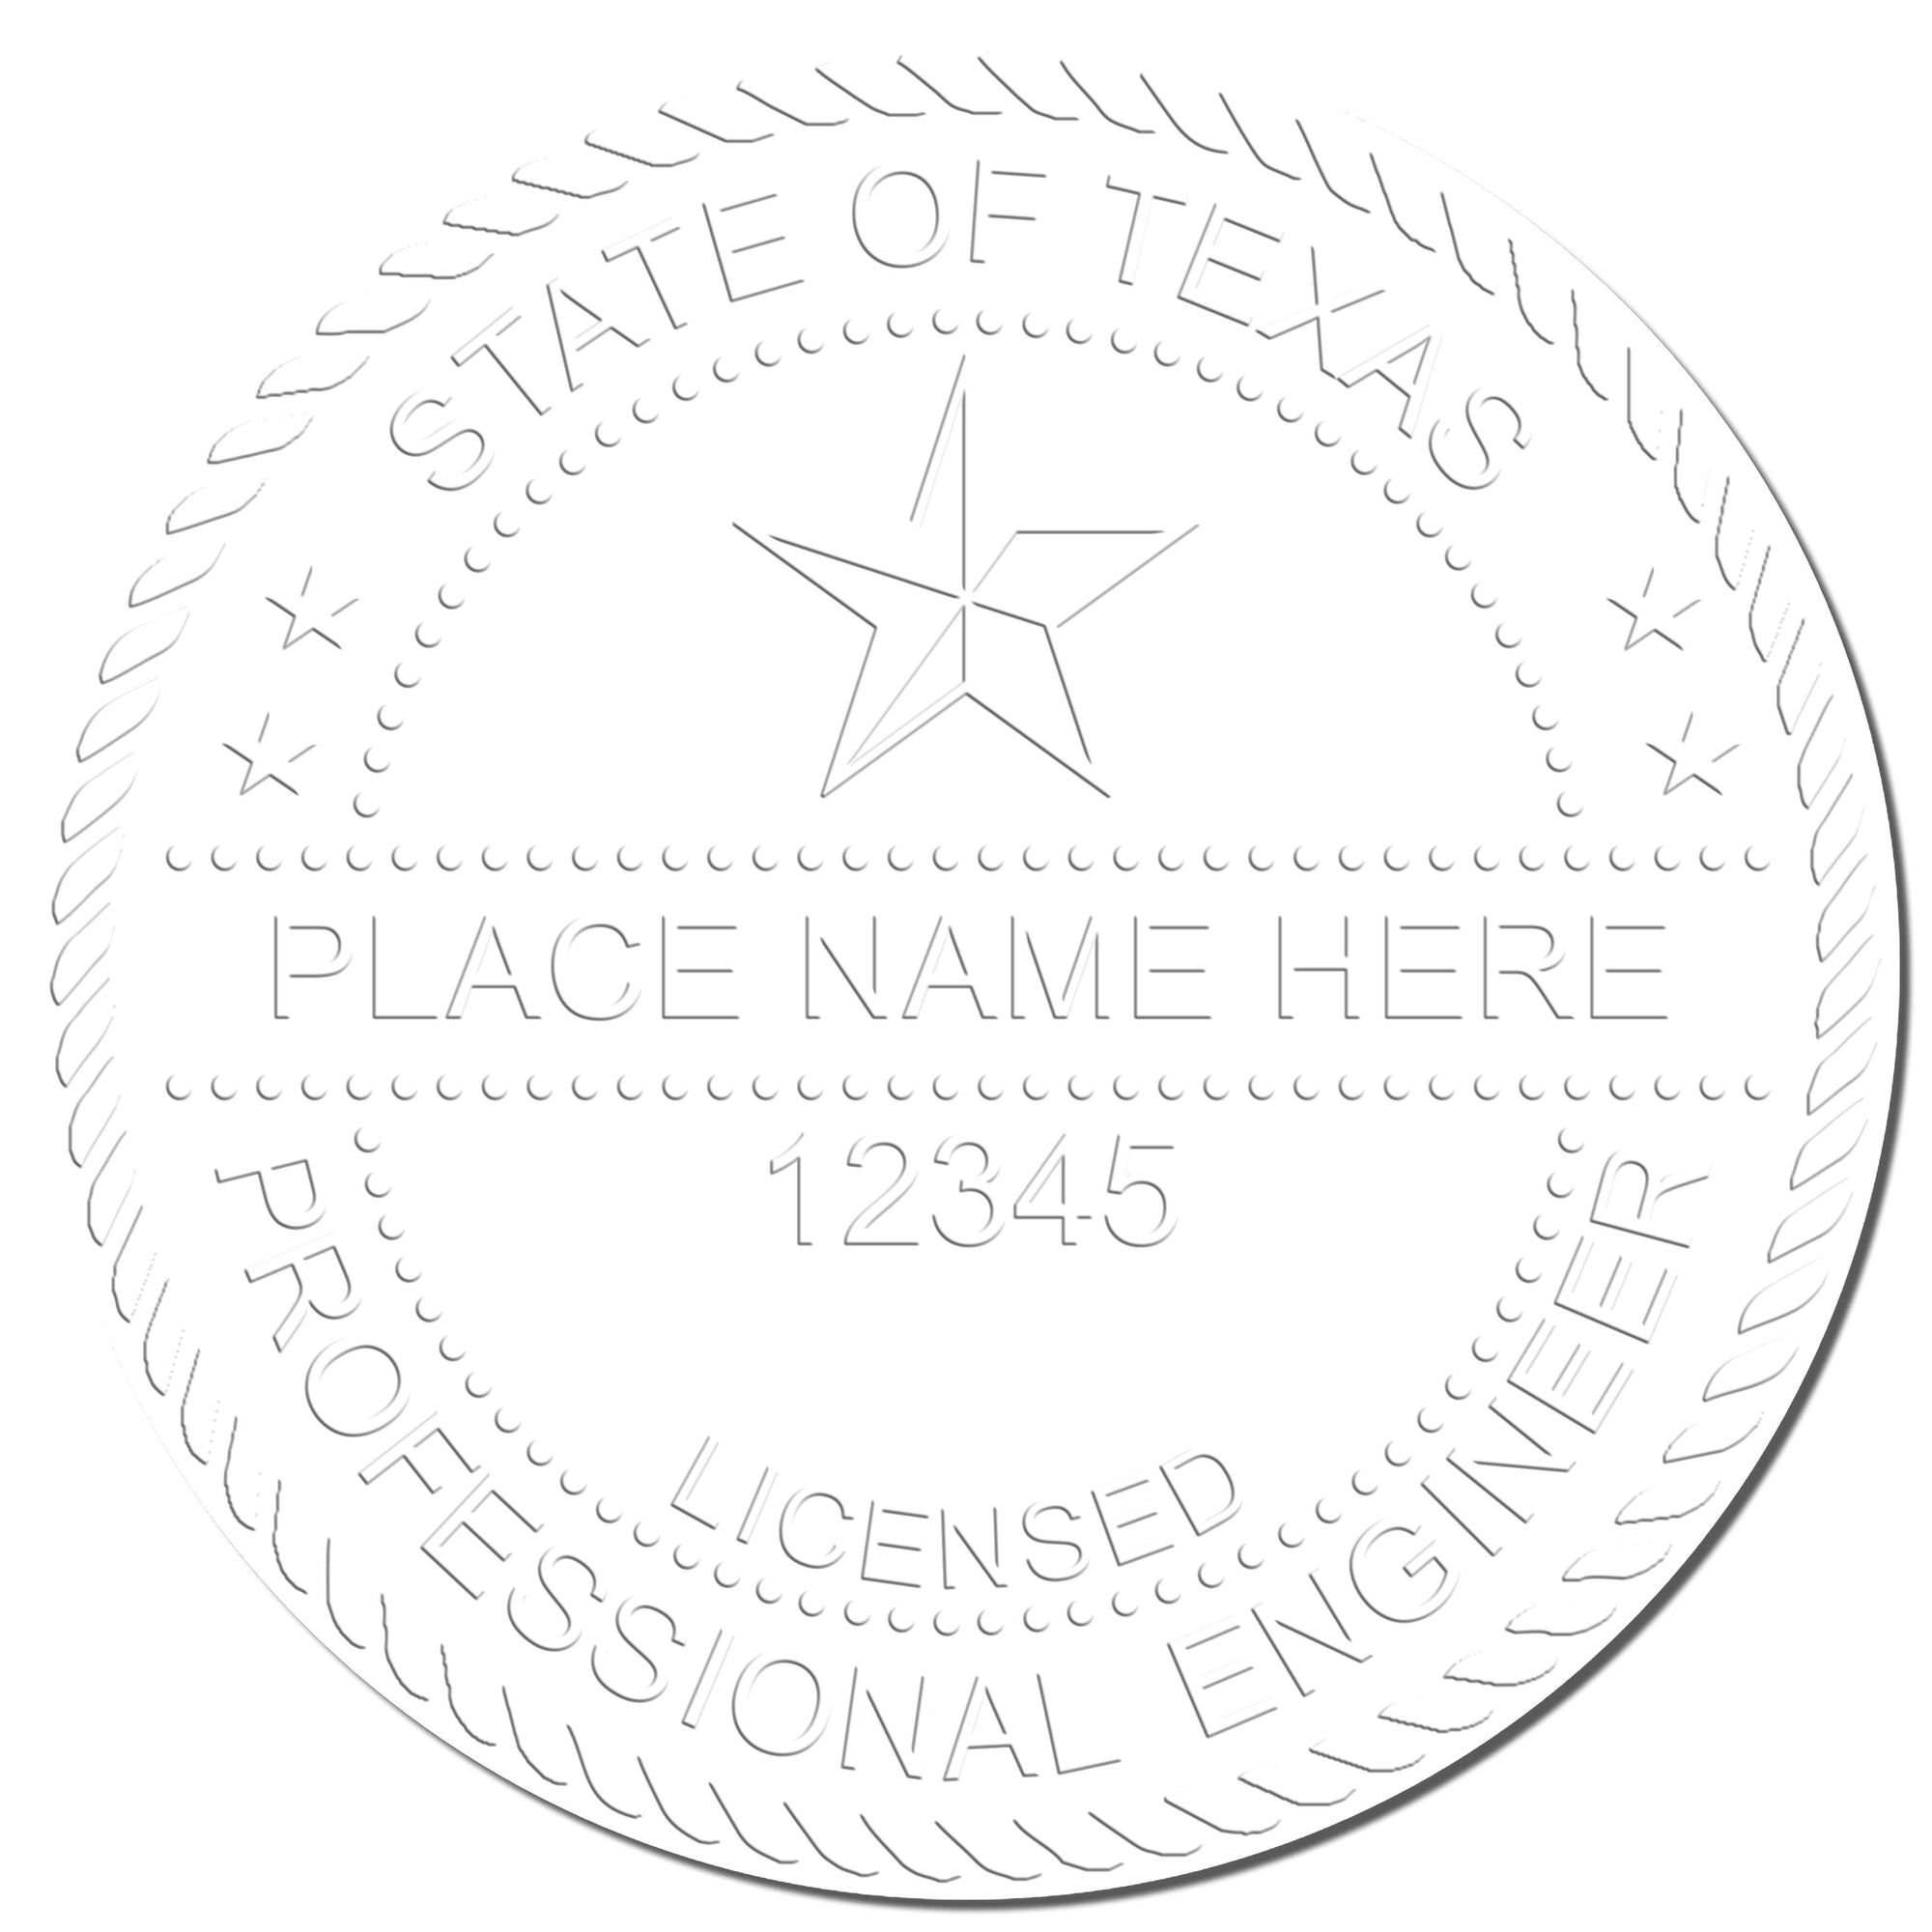 The main image for the Texas Engineer Desk Seal depicting a sample of the imprint and electronic files